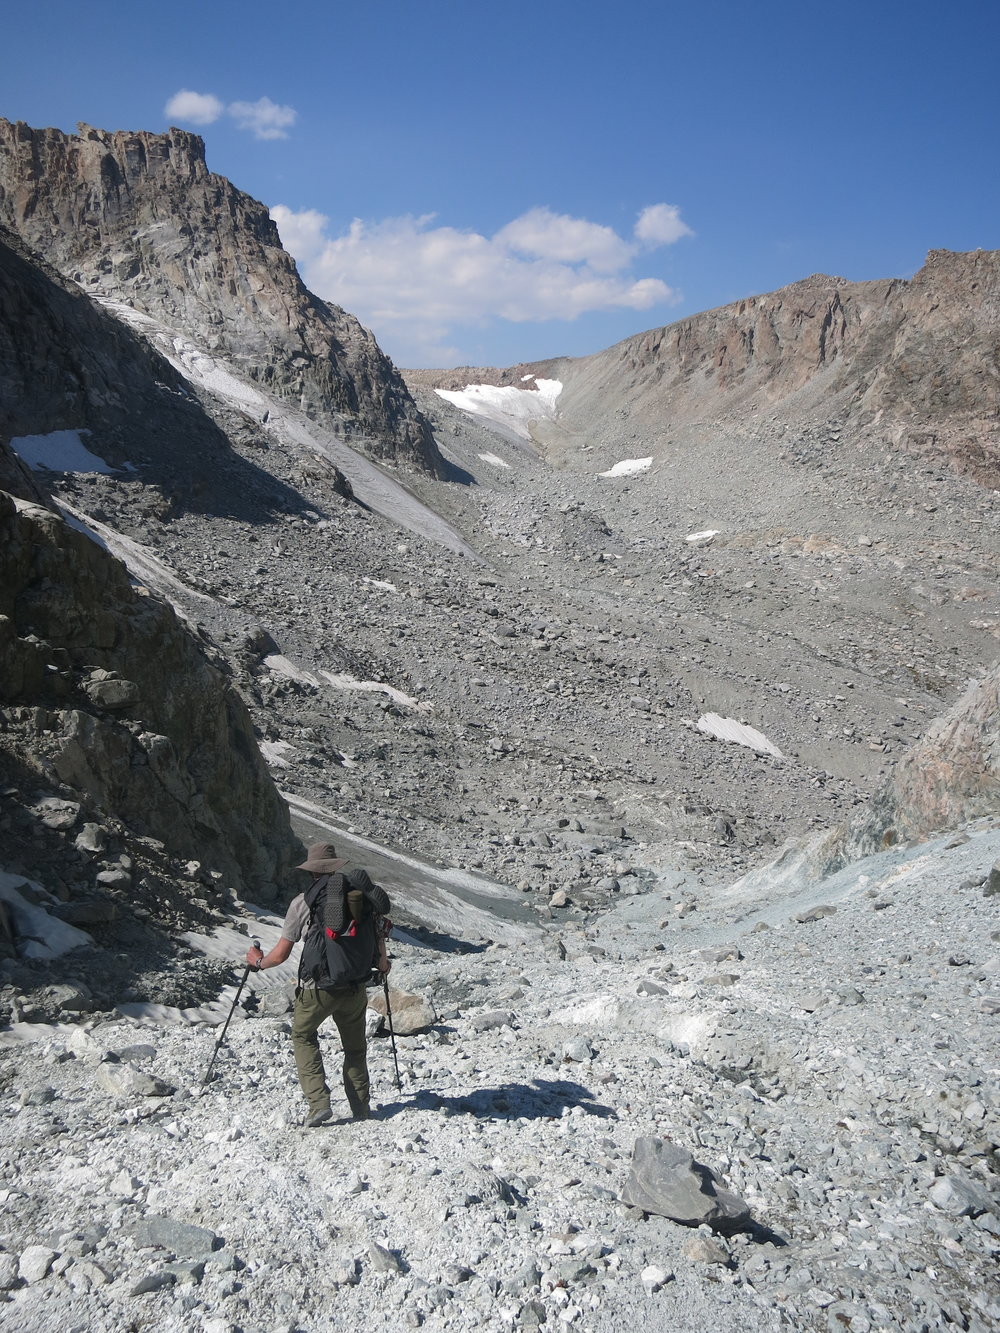 Beginning the steep descent from the gully.  Our next objective is that ice patch in the distance below the horizon.  